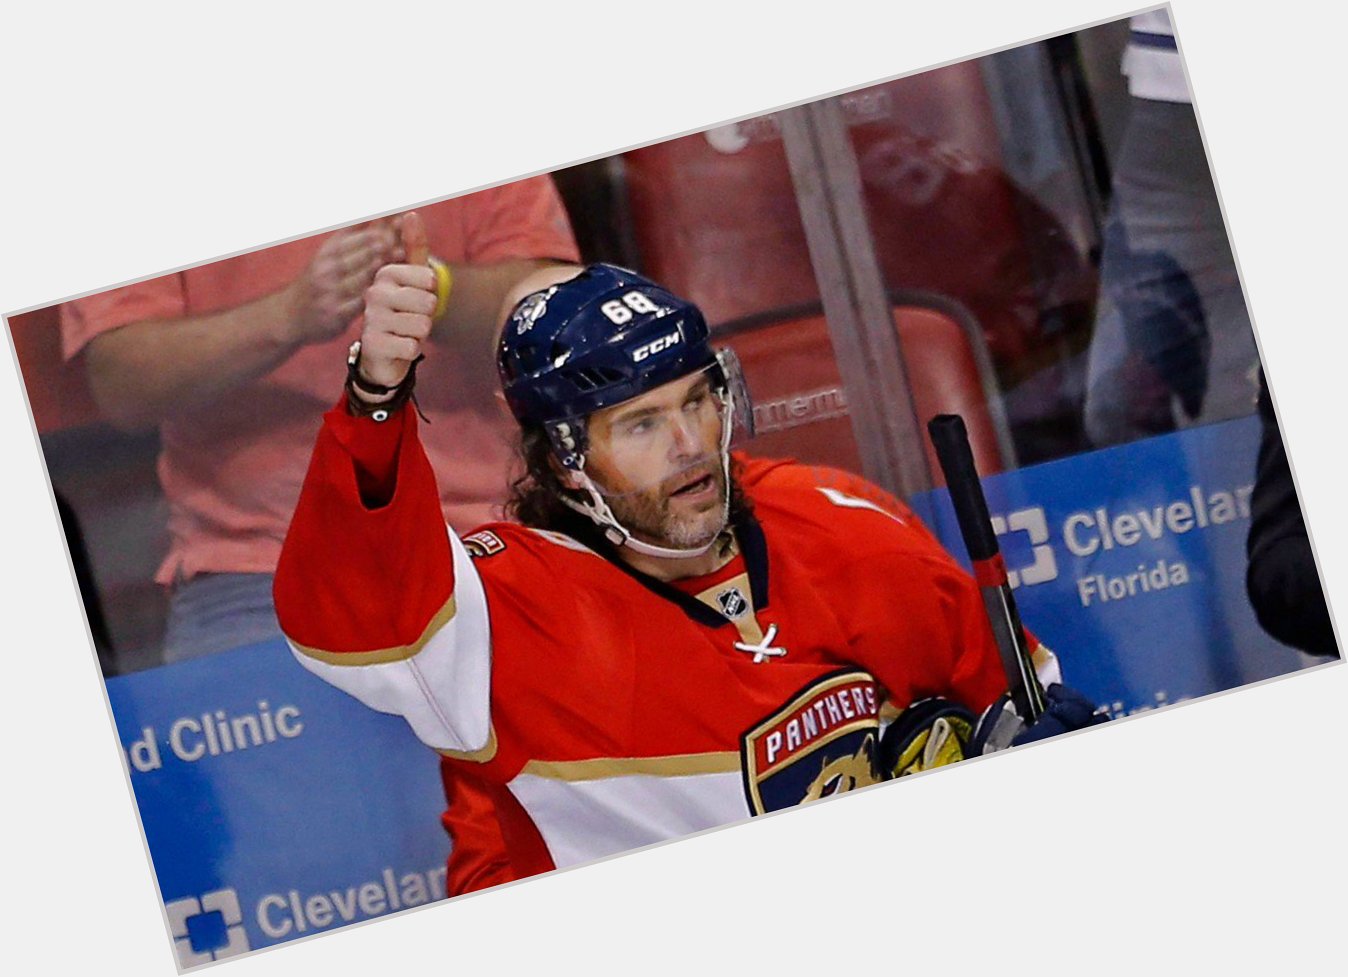 Happy 45th Birthday to Jaromir Jagr! He has 6 points in 7 career games on his birthday (2 G, 4 A). 